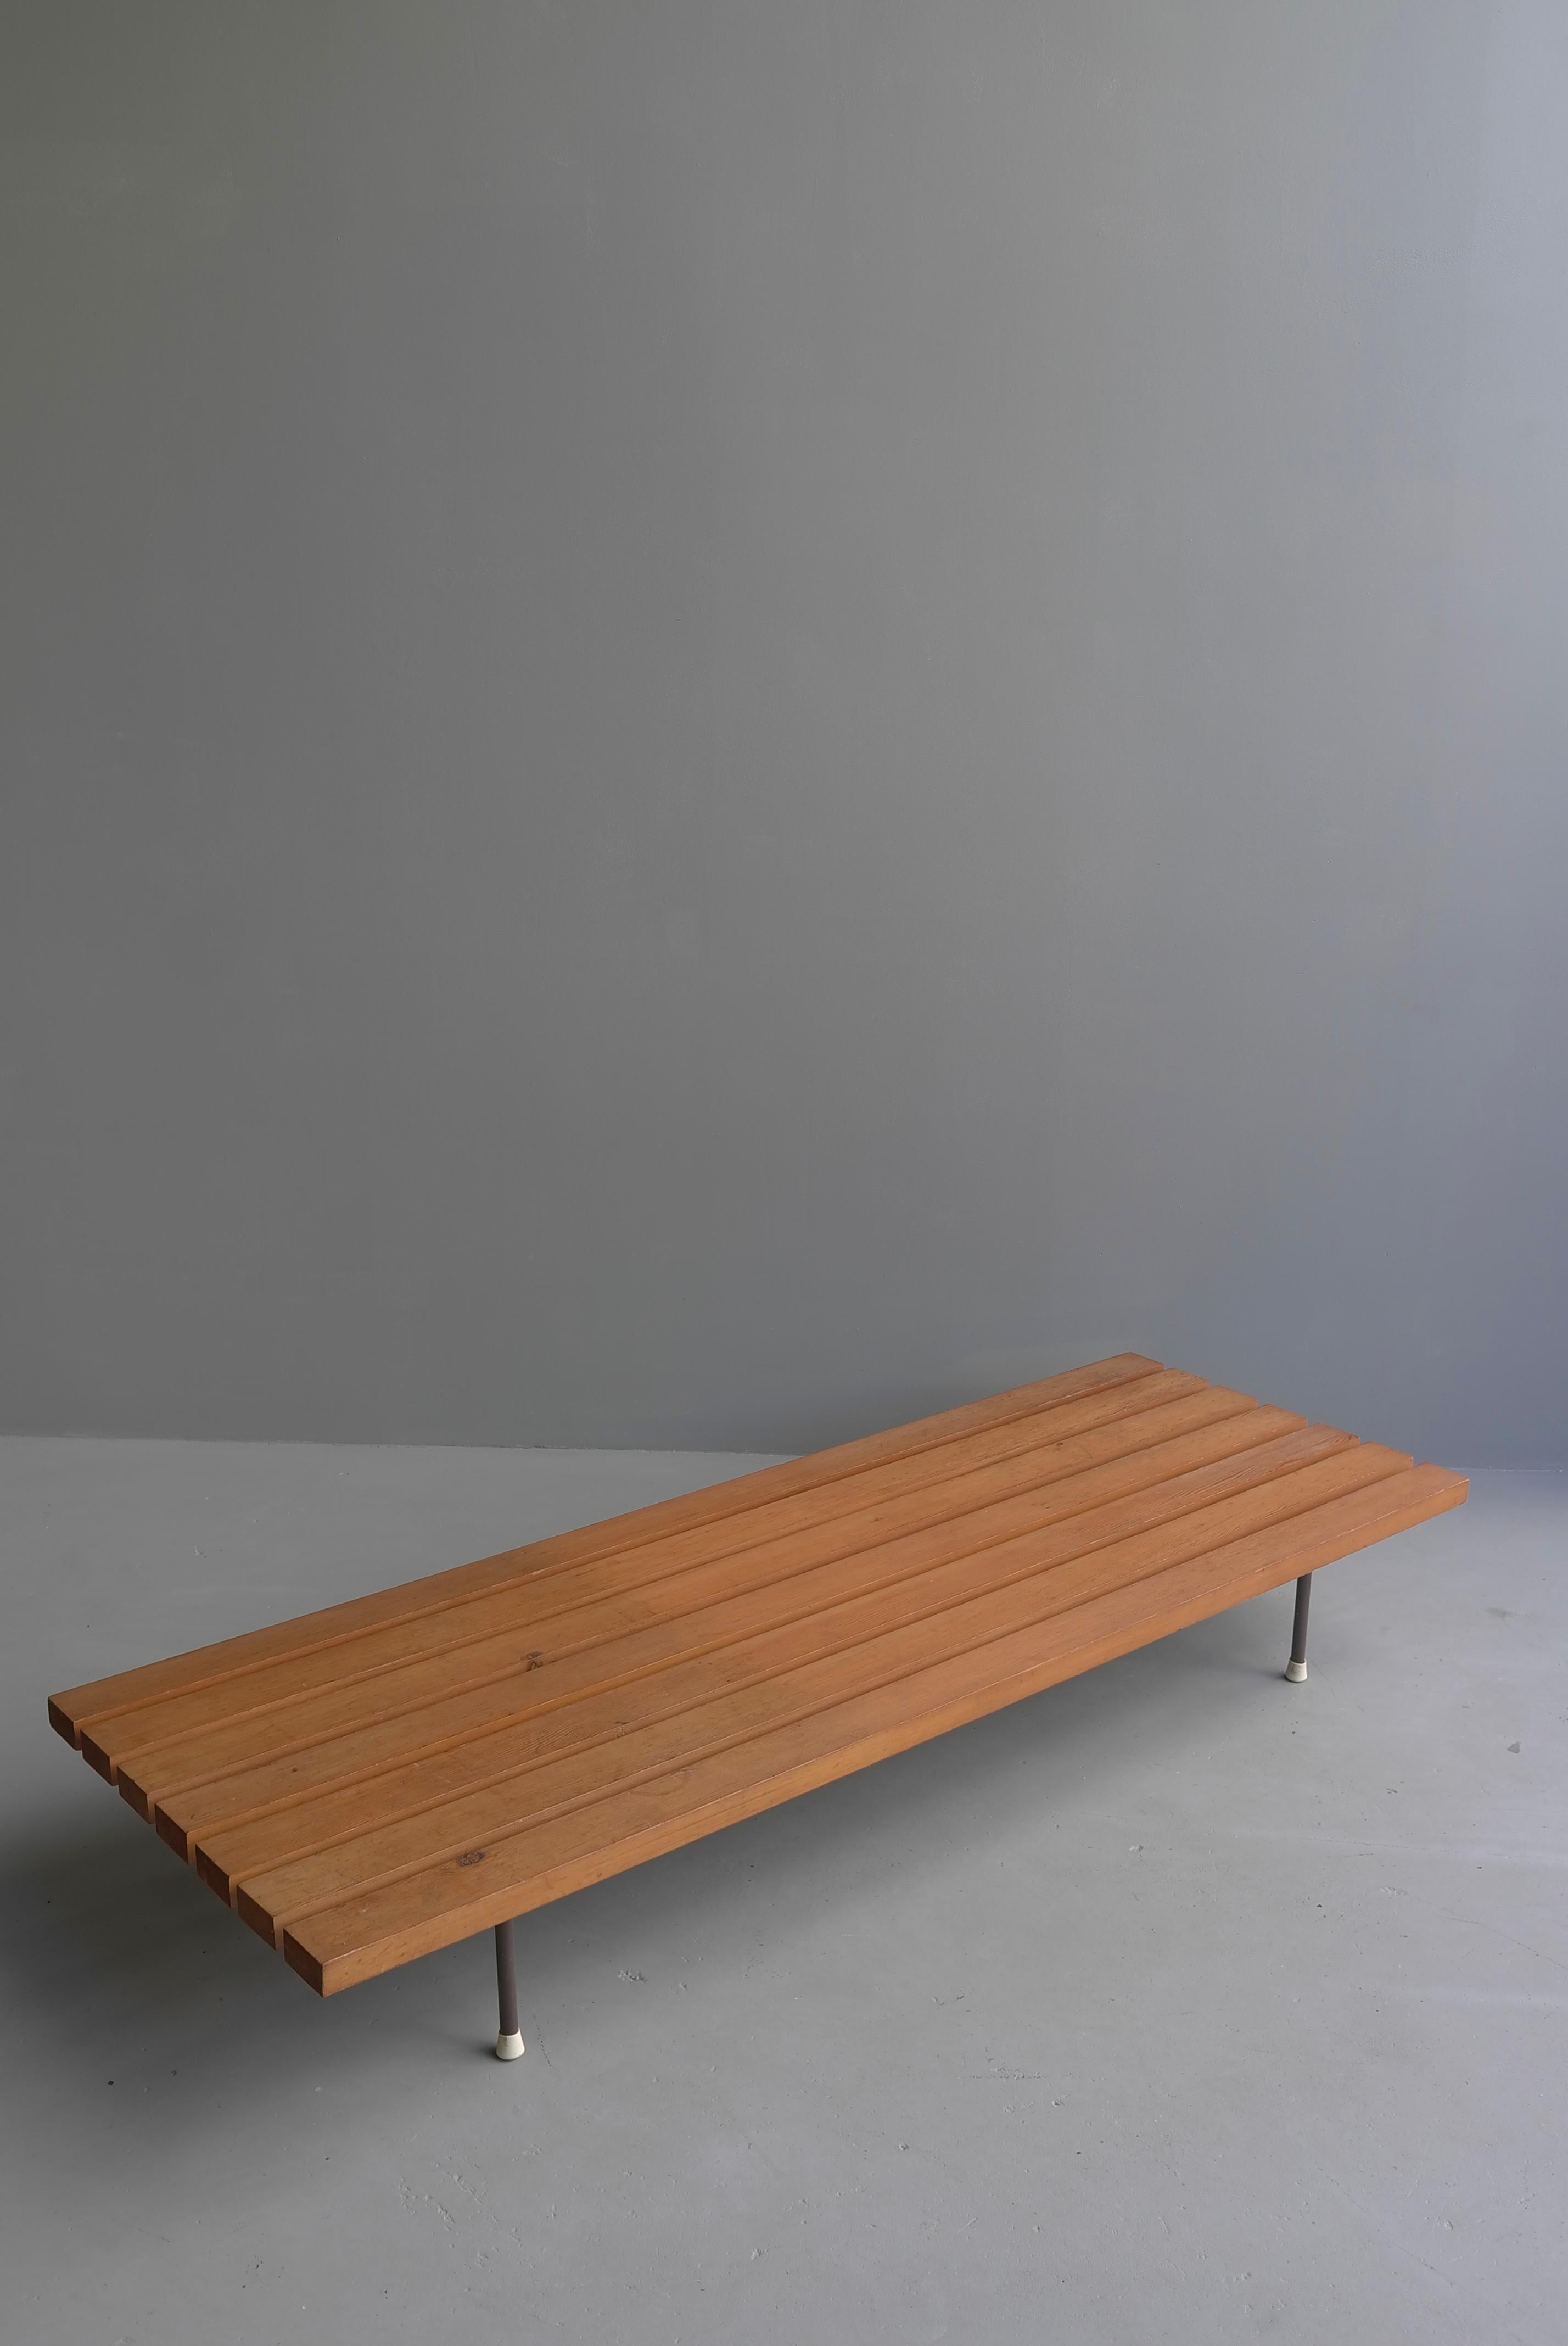 Minimalistic bench or daybed attributed to Wim Rietveld, the Netherlands, 1960s.